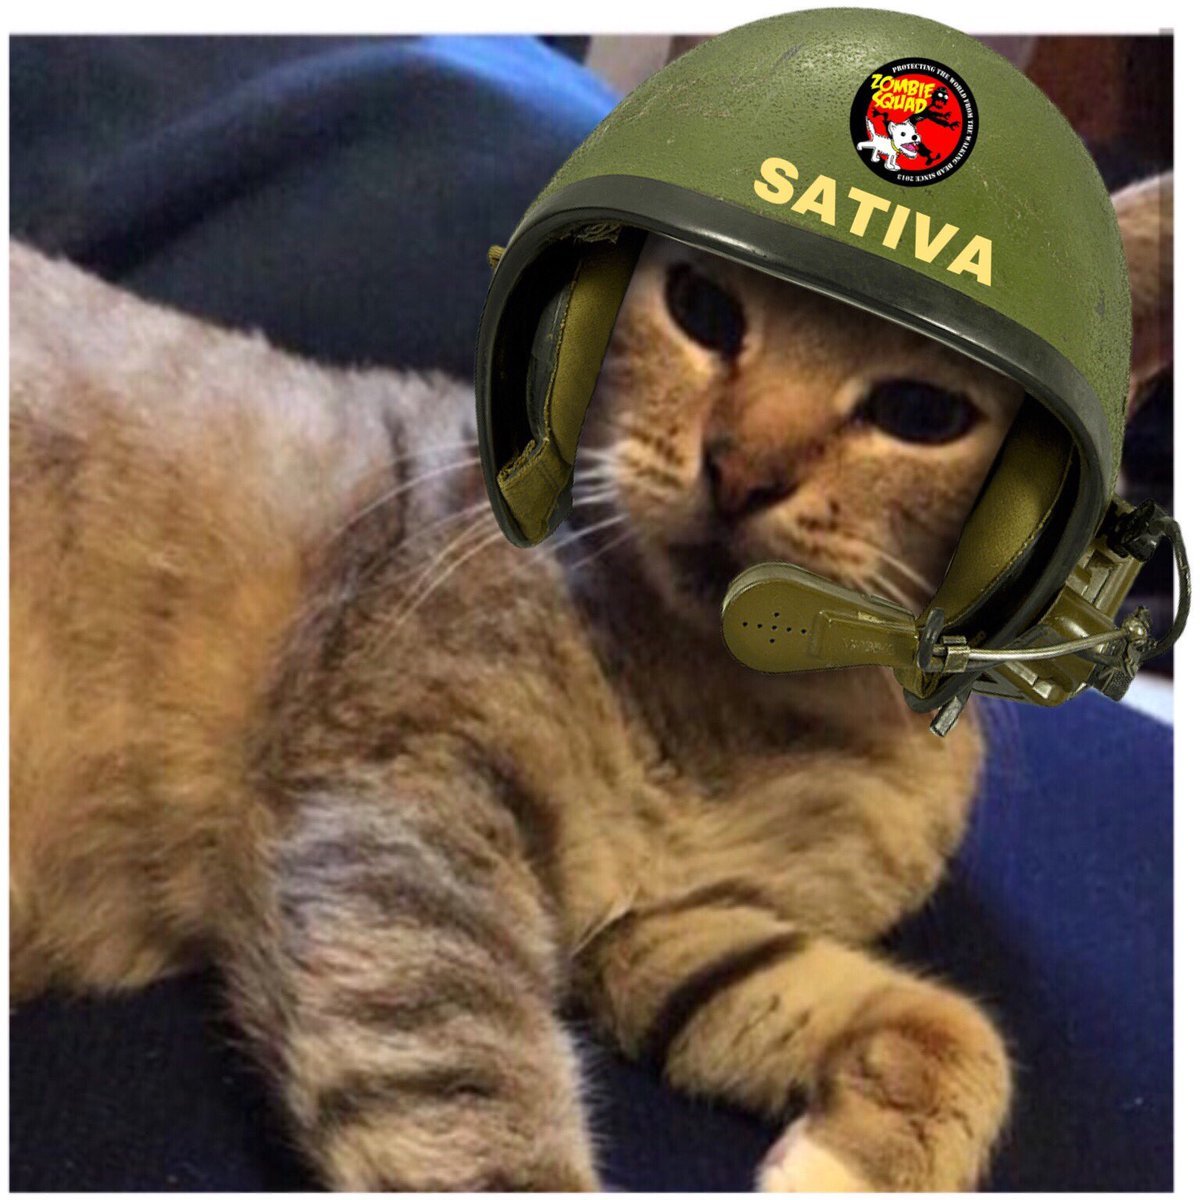 Hi my name is Sativa Aponte. Meow. I am very proud member of the #zshq destroy teh zombies! I love wrestling.